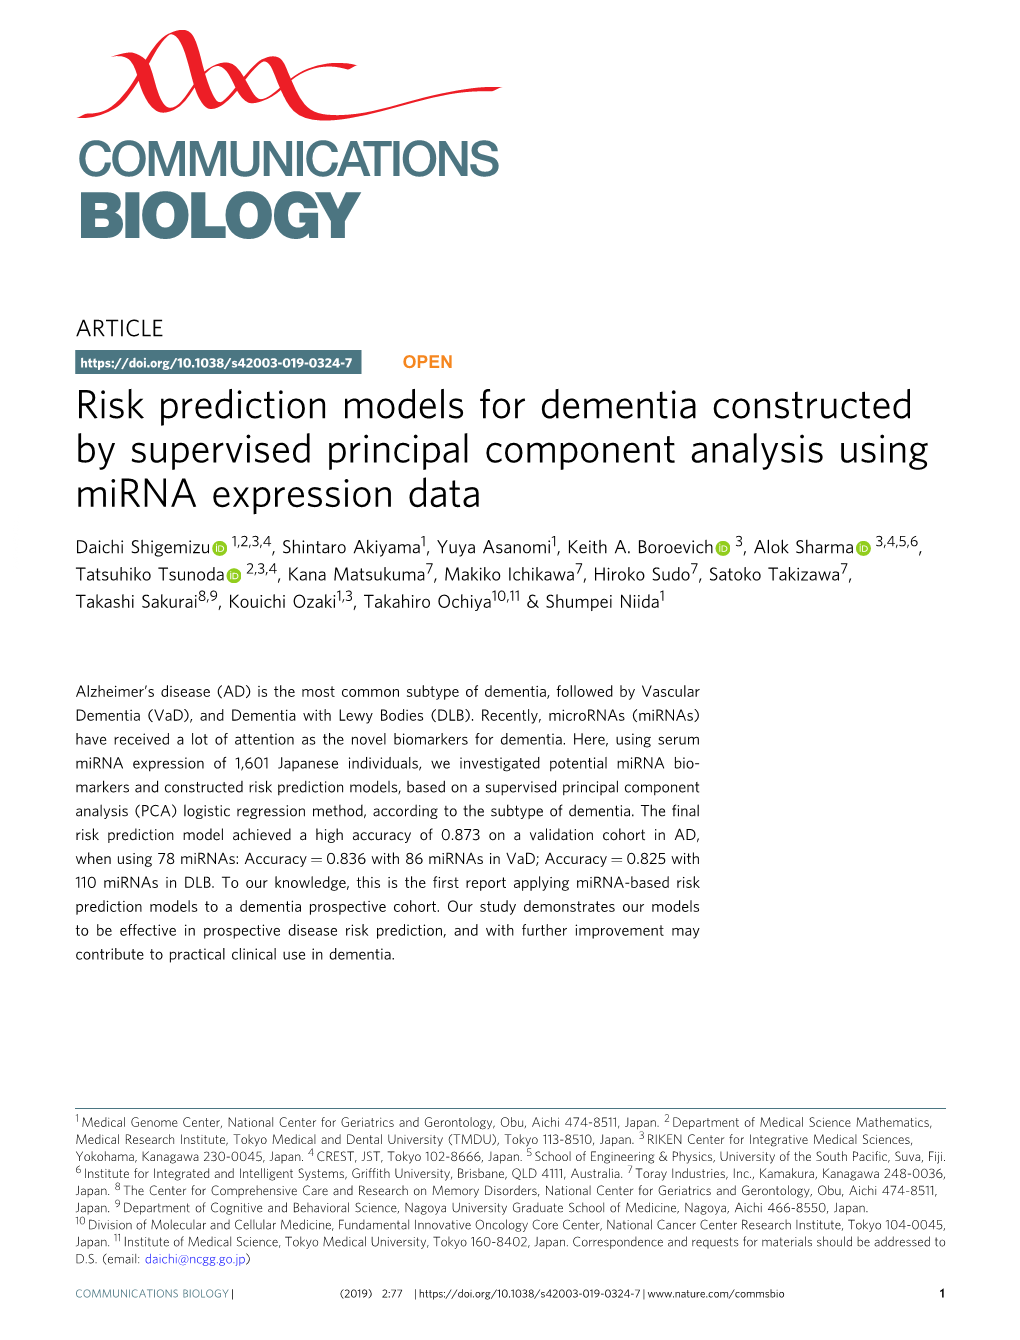 Risk Prediction Models for Dementia Constructed by Supervised Principal Component Analysis Using Mirna Expression Data